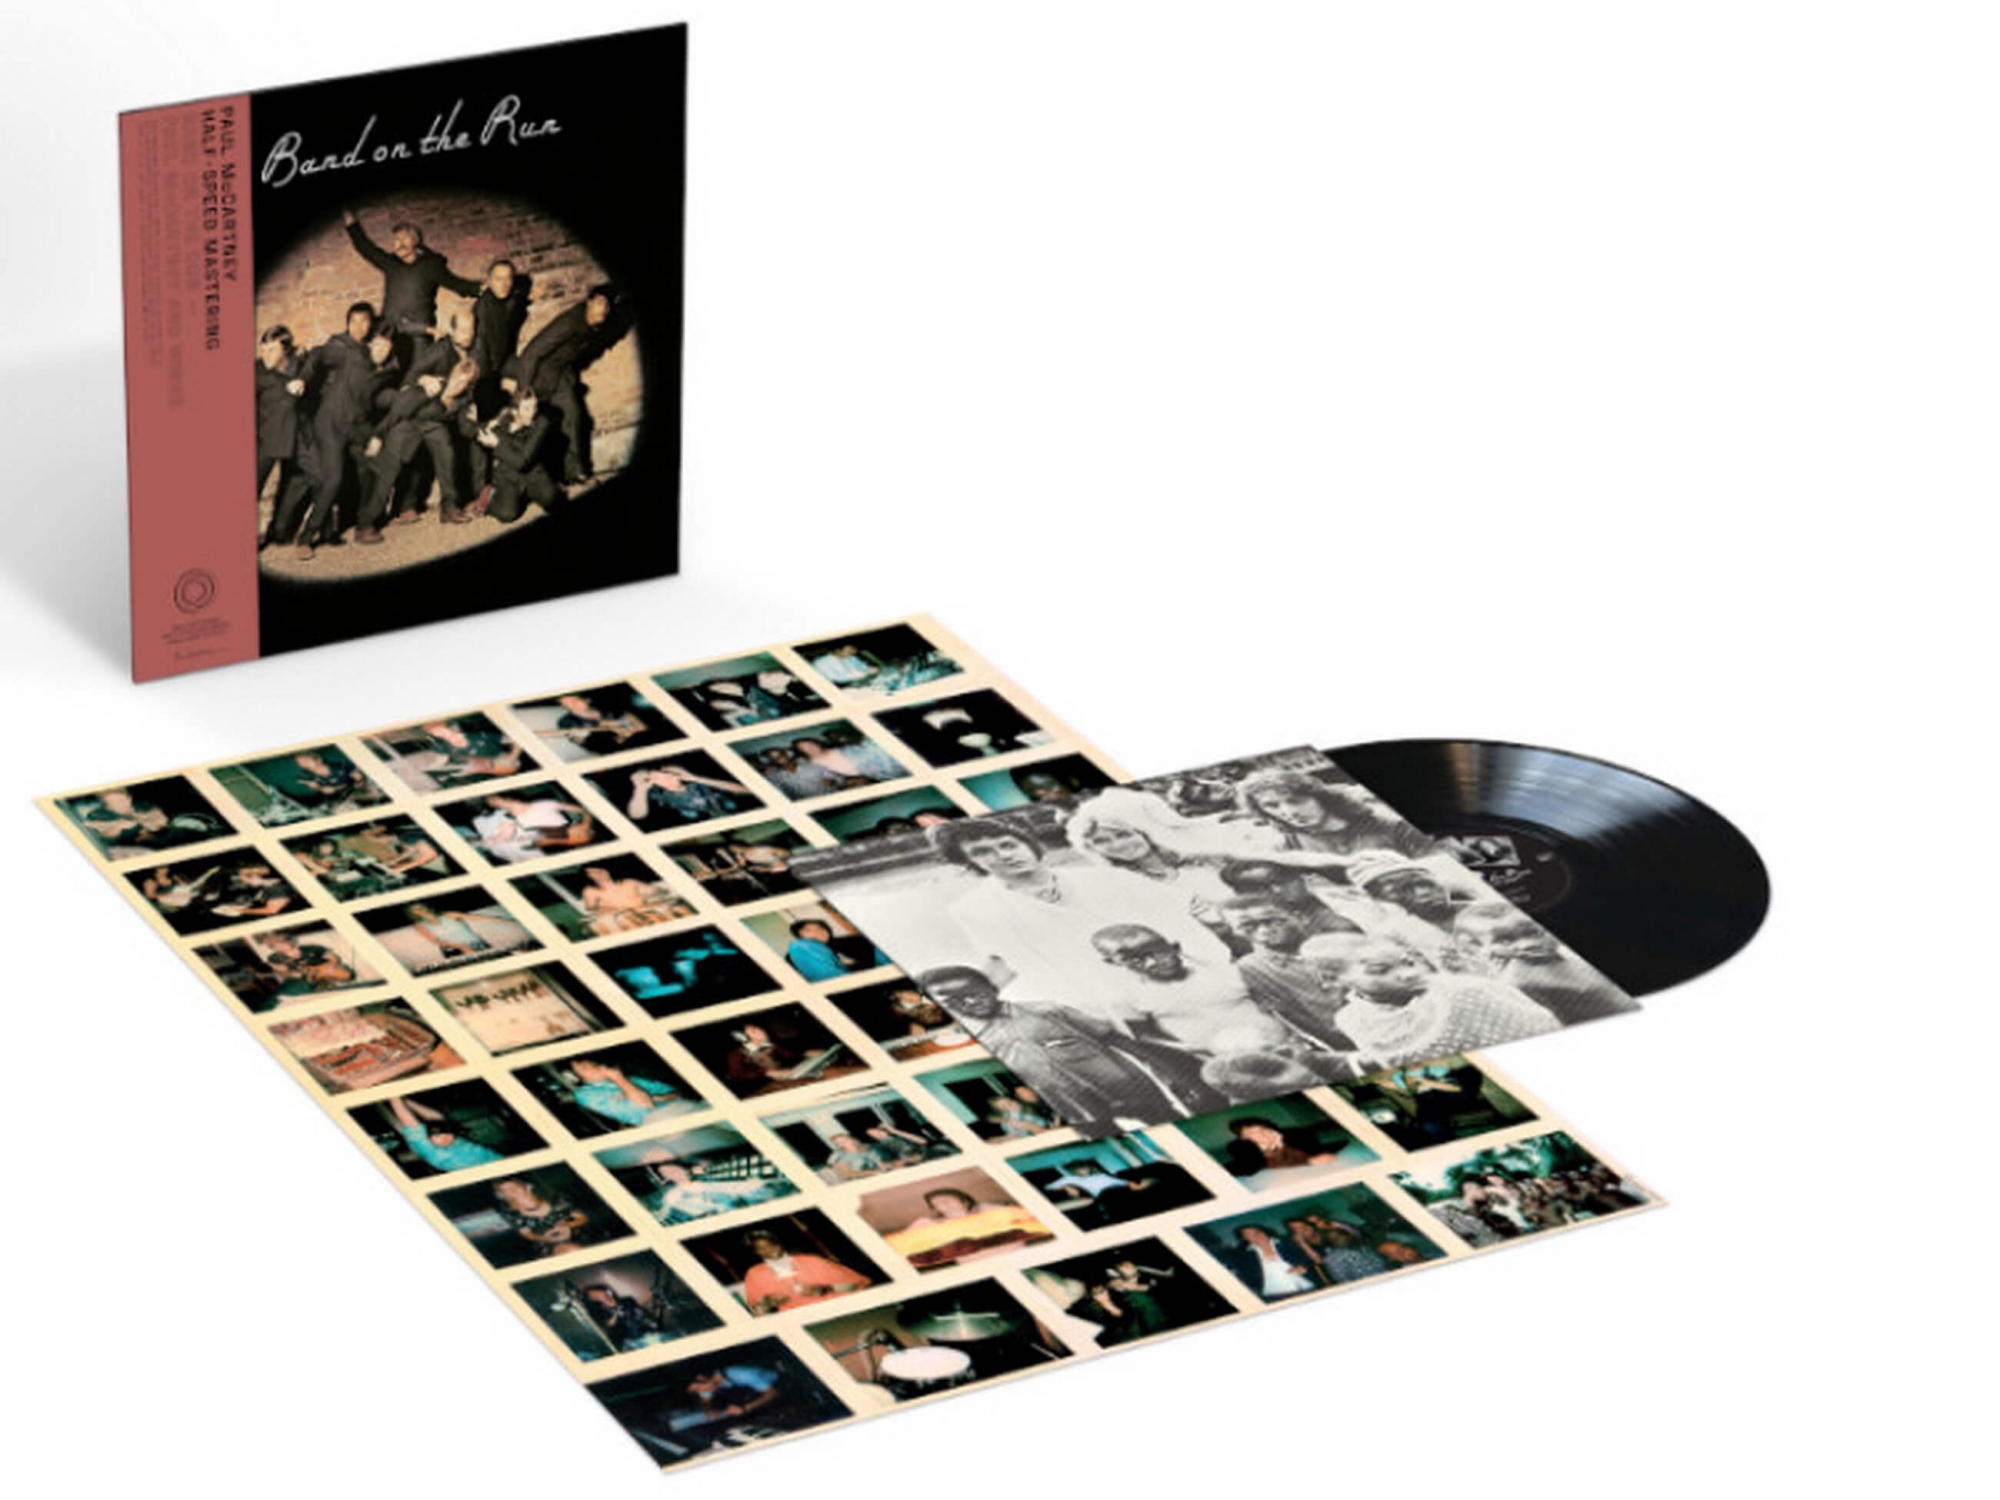 Paul McCartney and Wings Band on the Run 50 th Anniversary LP